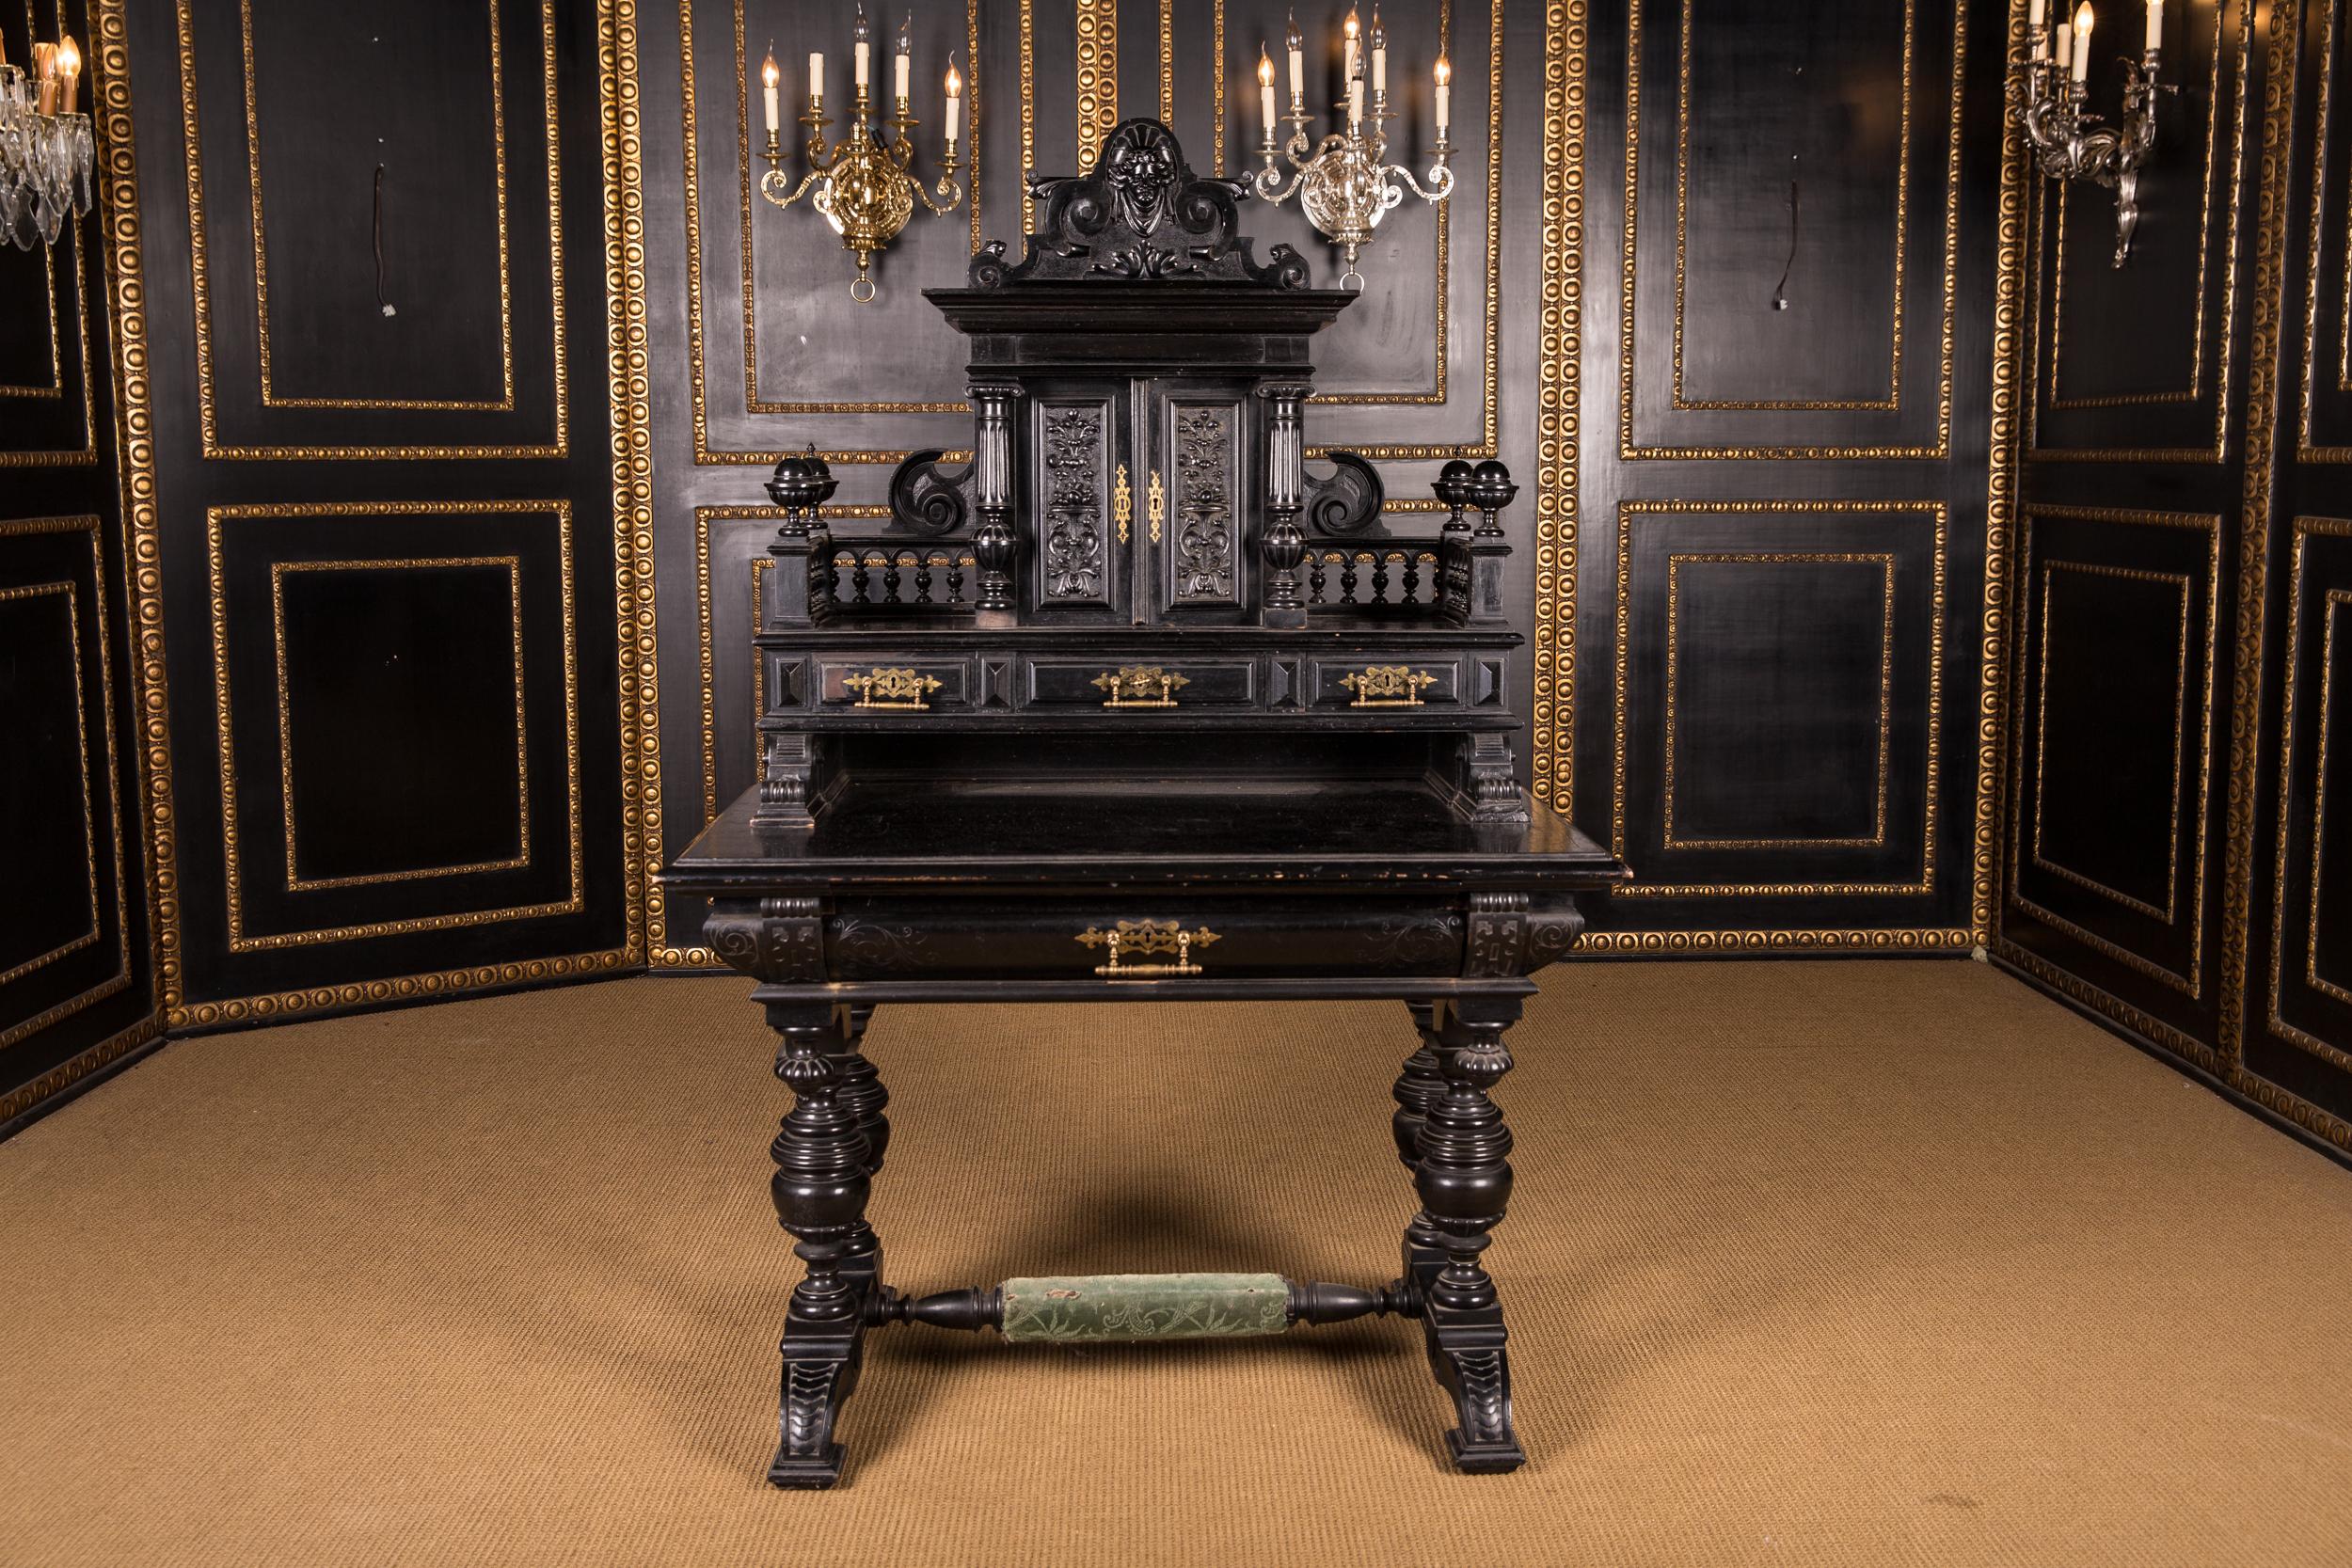 Richly carved, solid oak. Front high knee compartment with richly carved drawer, above a retractable writing compartment upholstered in leather, connected by a bridge on strong turned ball-shaped columns. Slightly overhanging tabletop, strongly